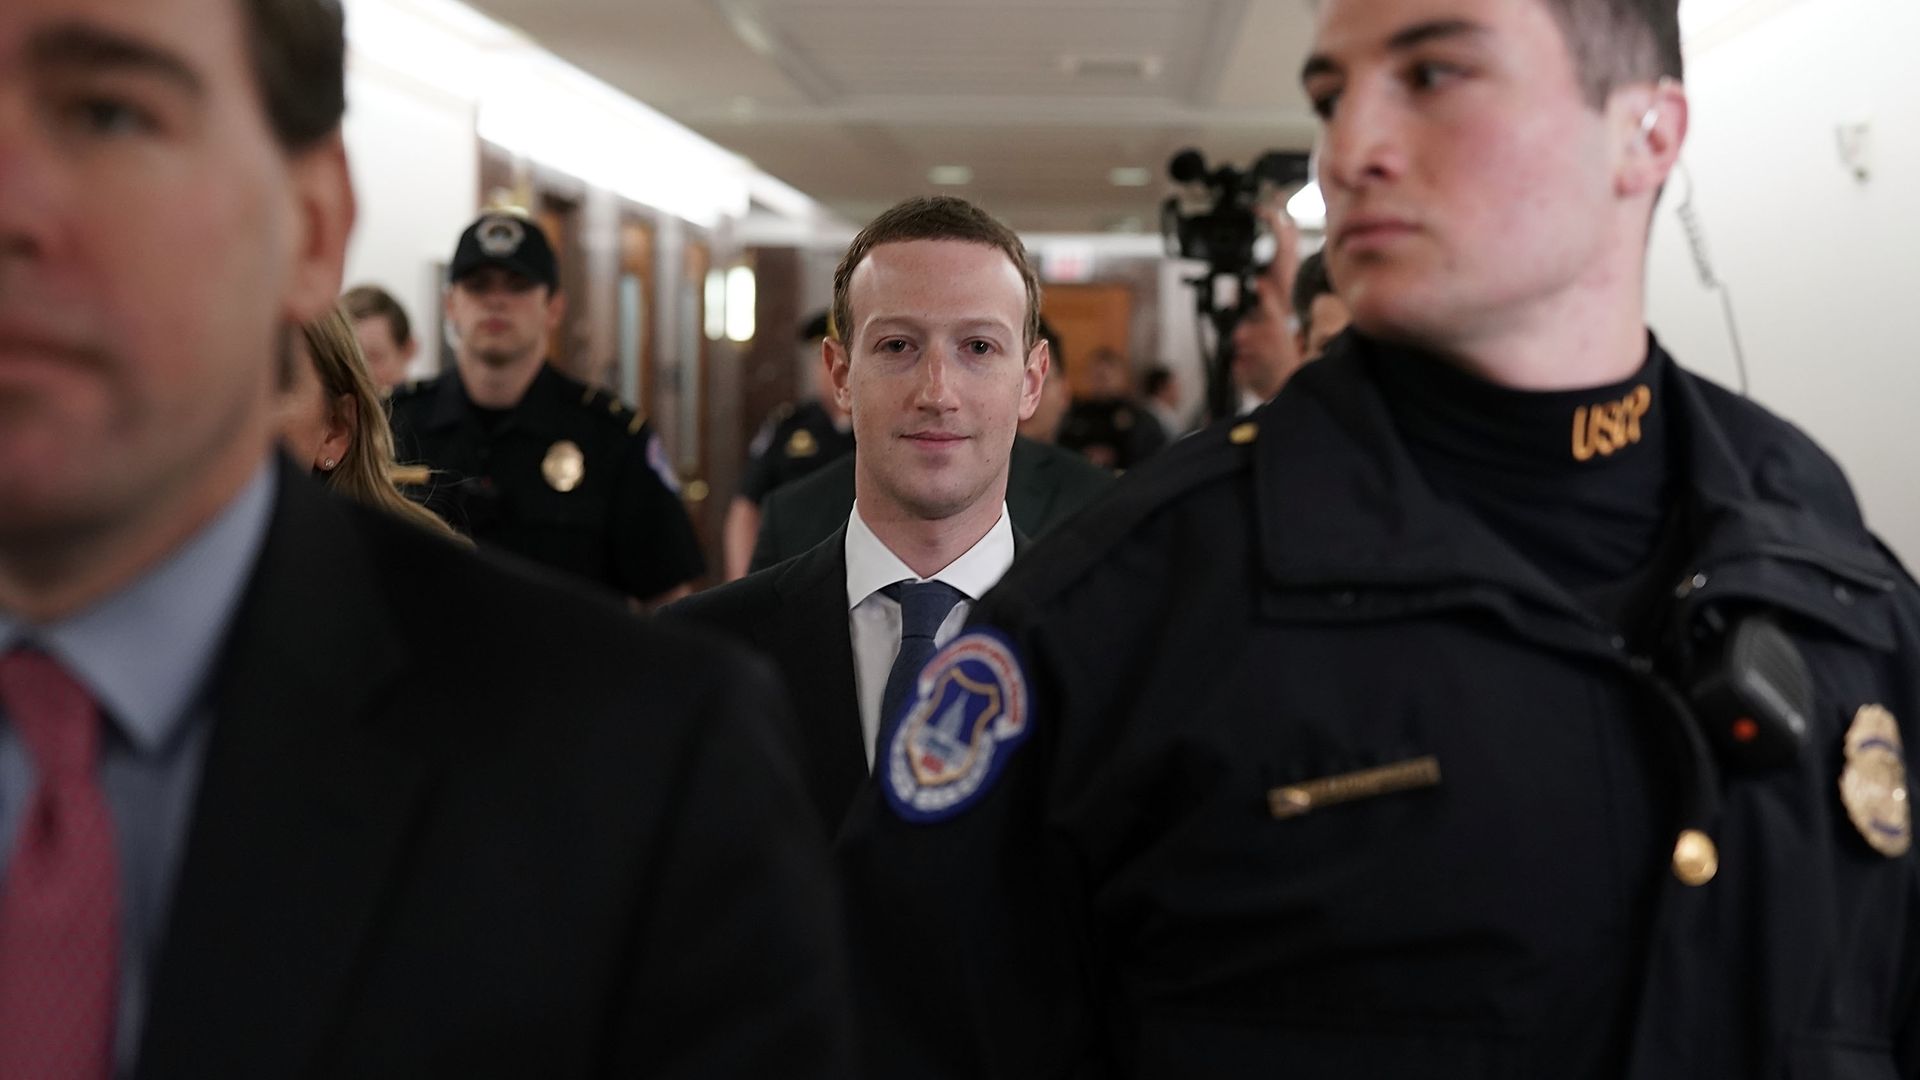 Mark Zuckerberg behind two other people